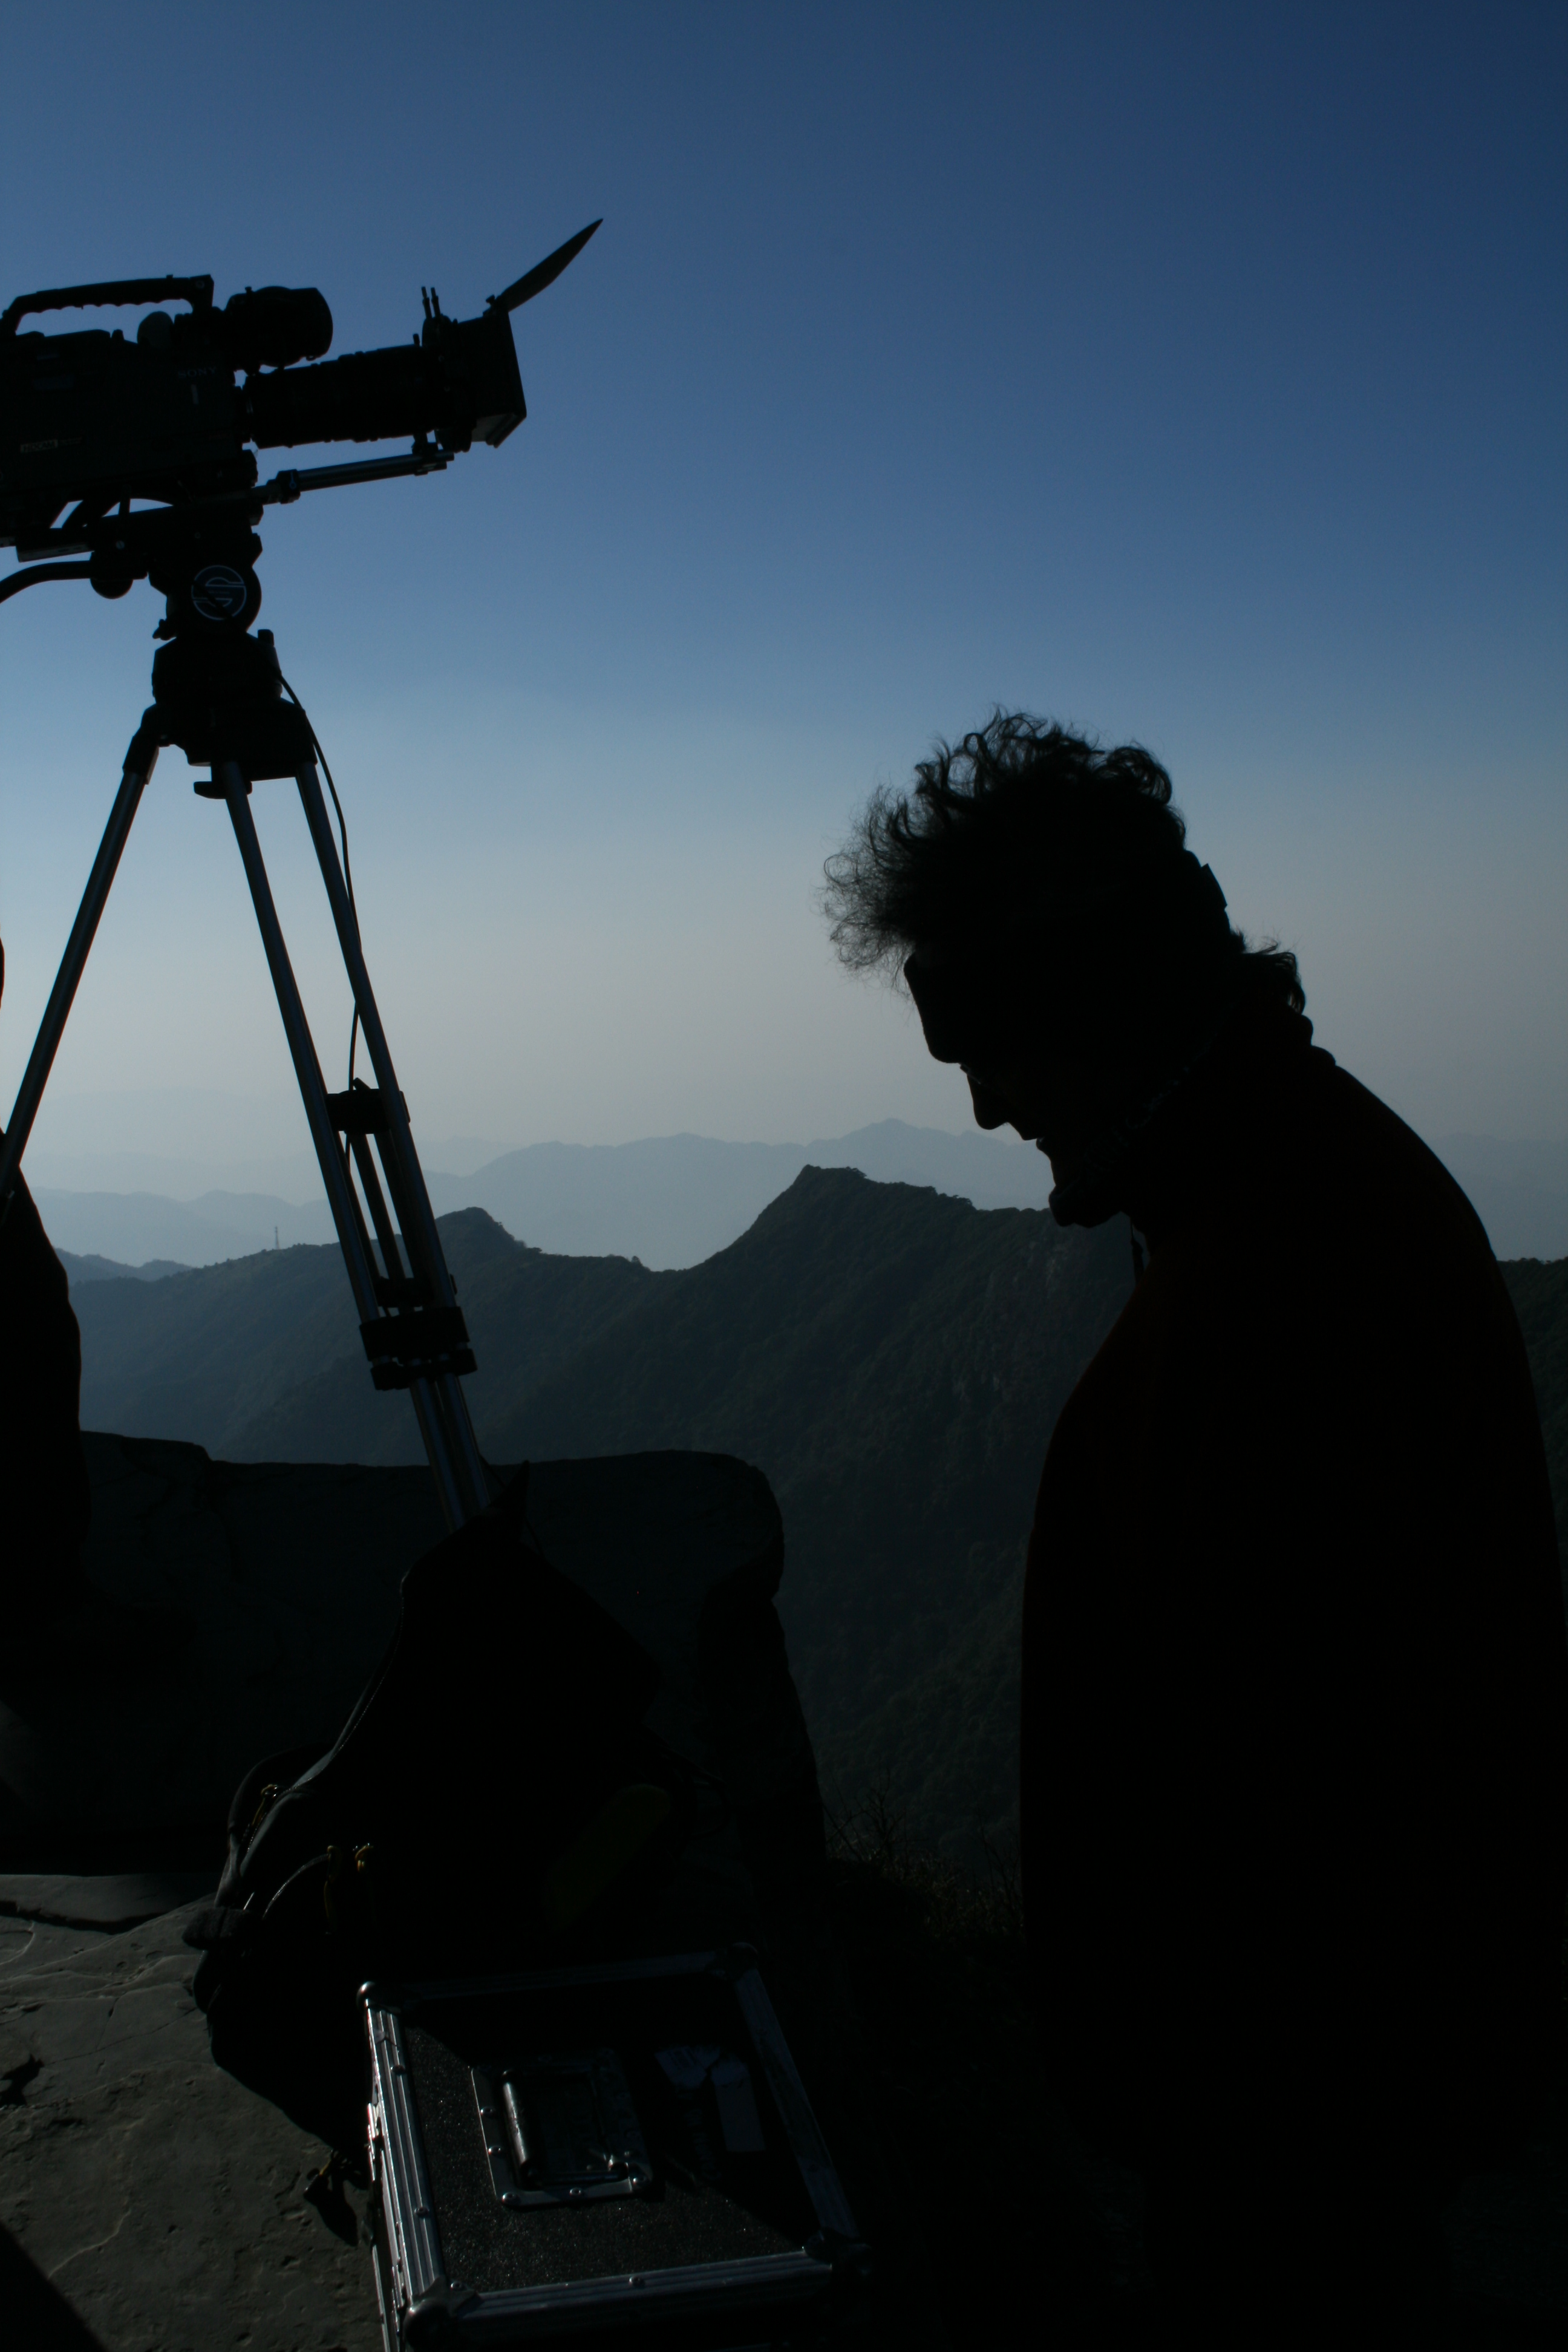 Larry Levene filming in Huanglong, China